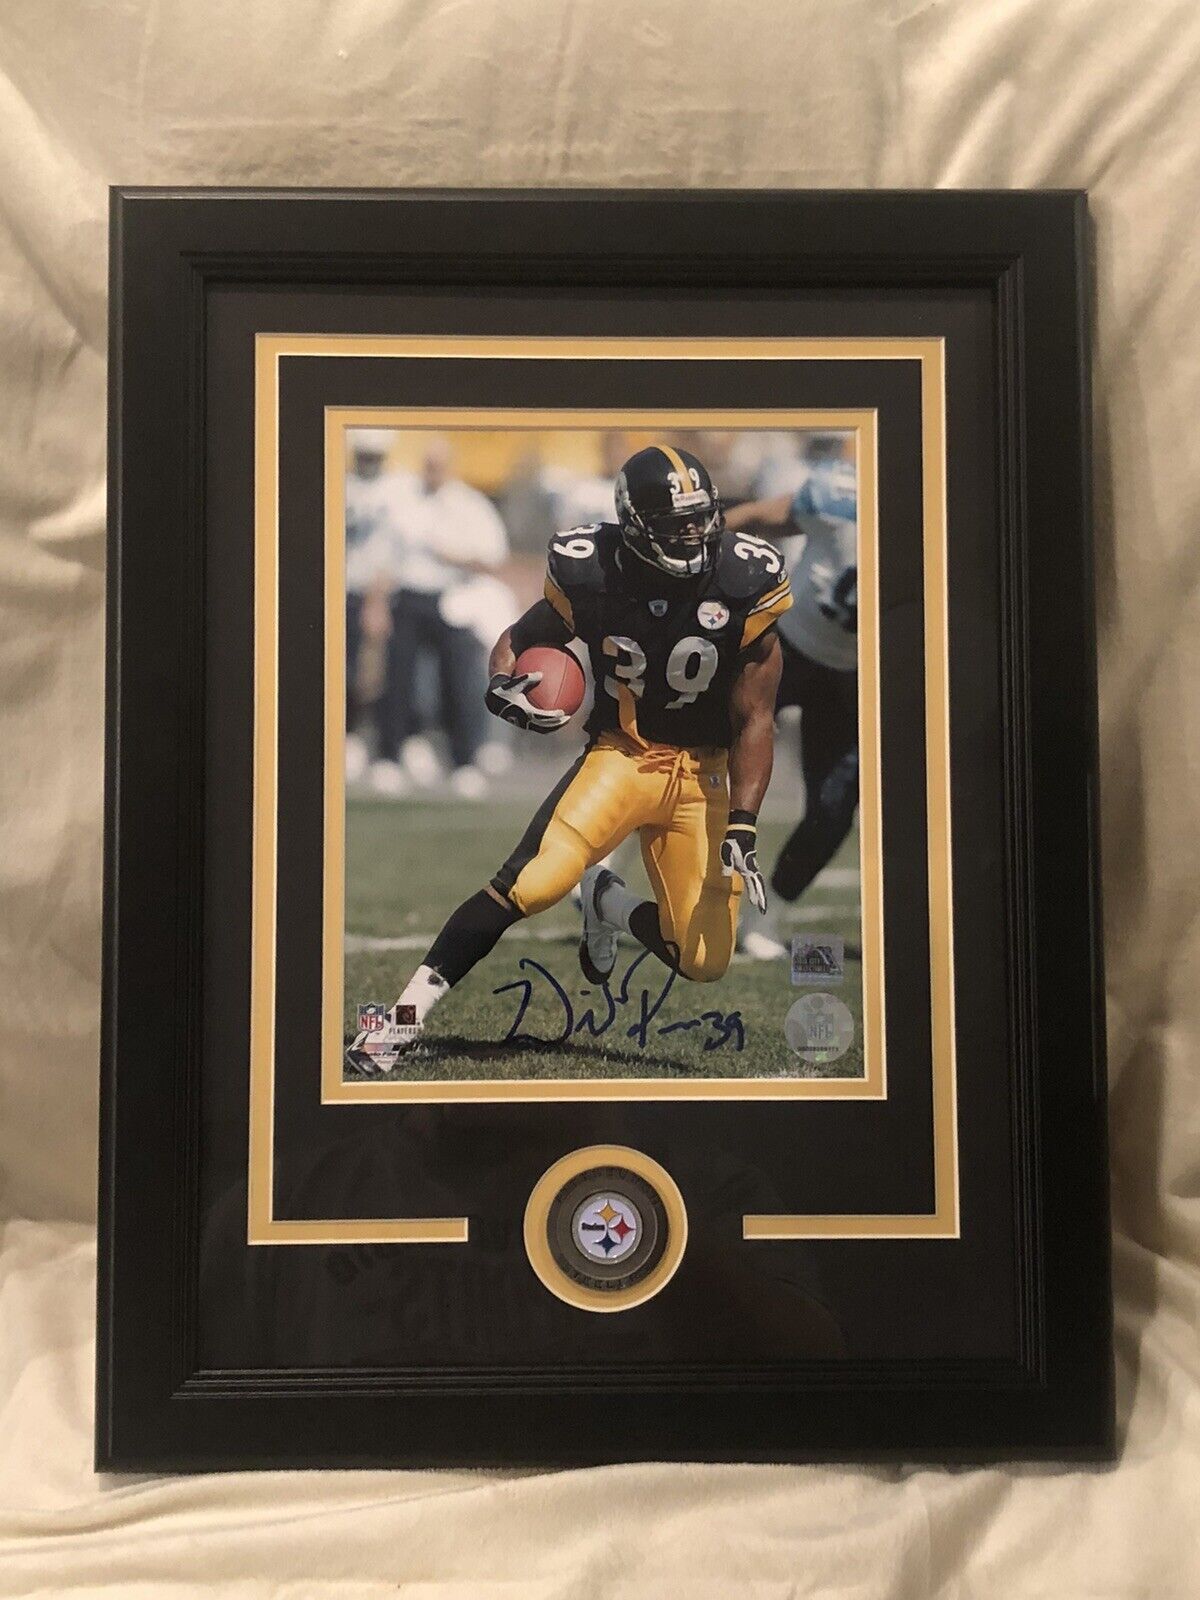 Willie Parker PITTSBURGH Steelers Signed Framed 8x10 Photo SB XL Champ COA